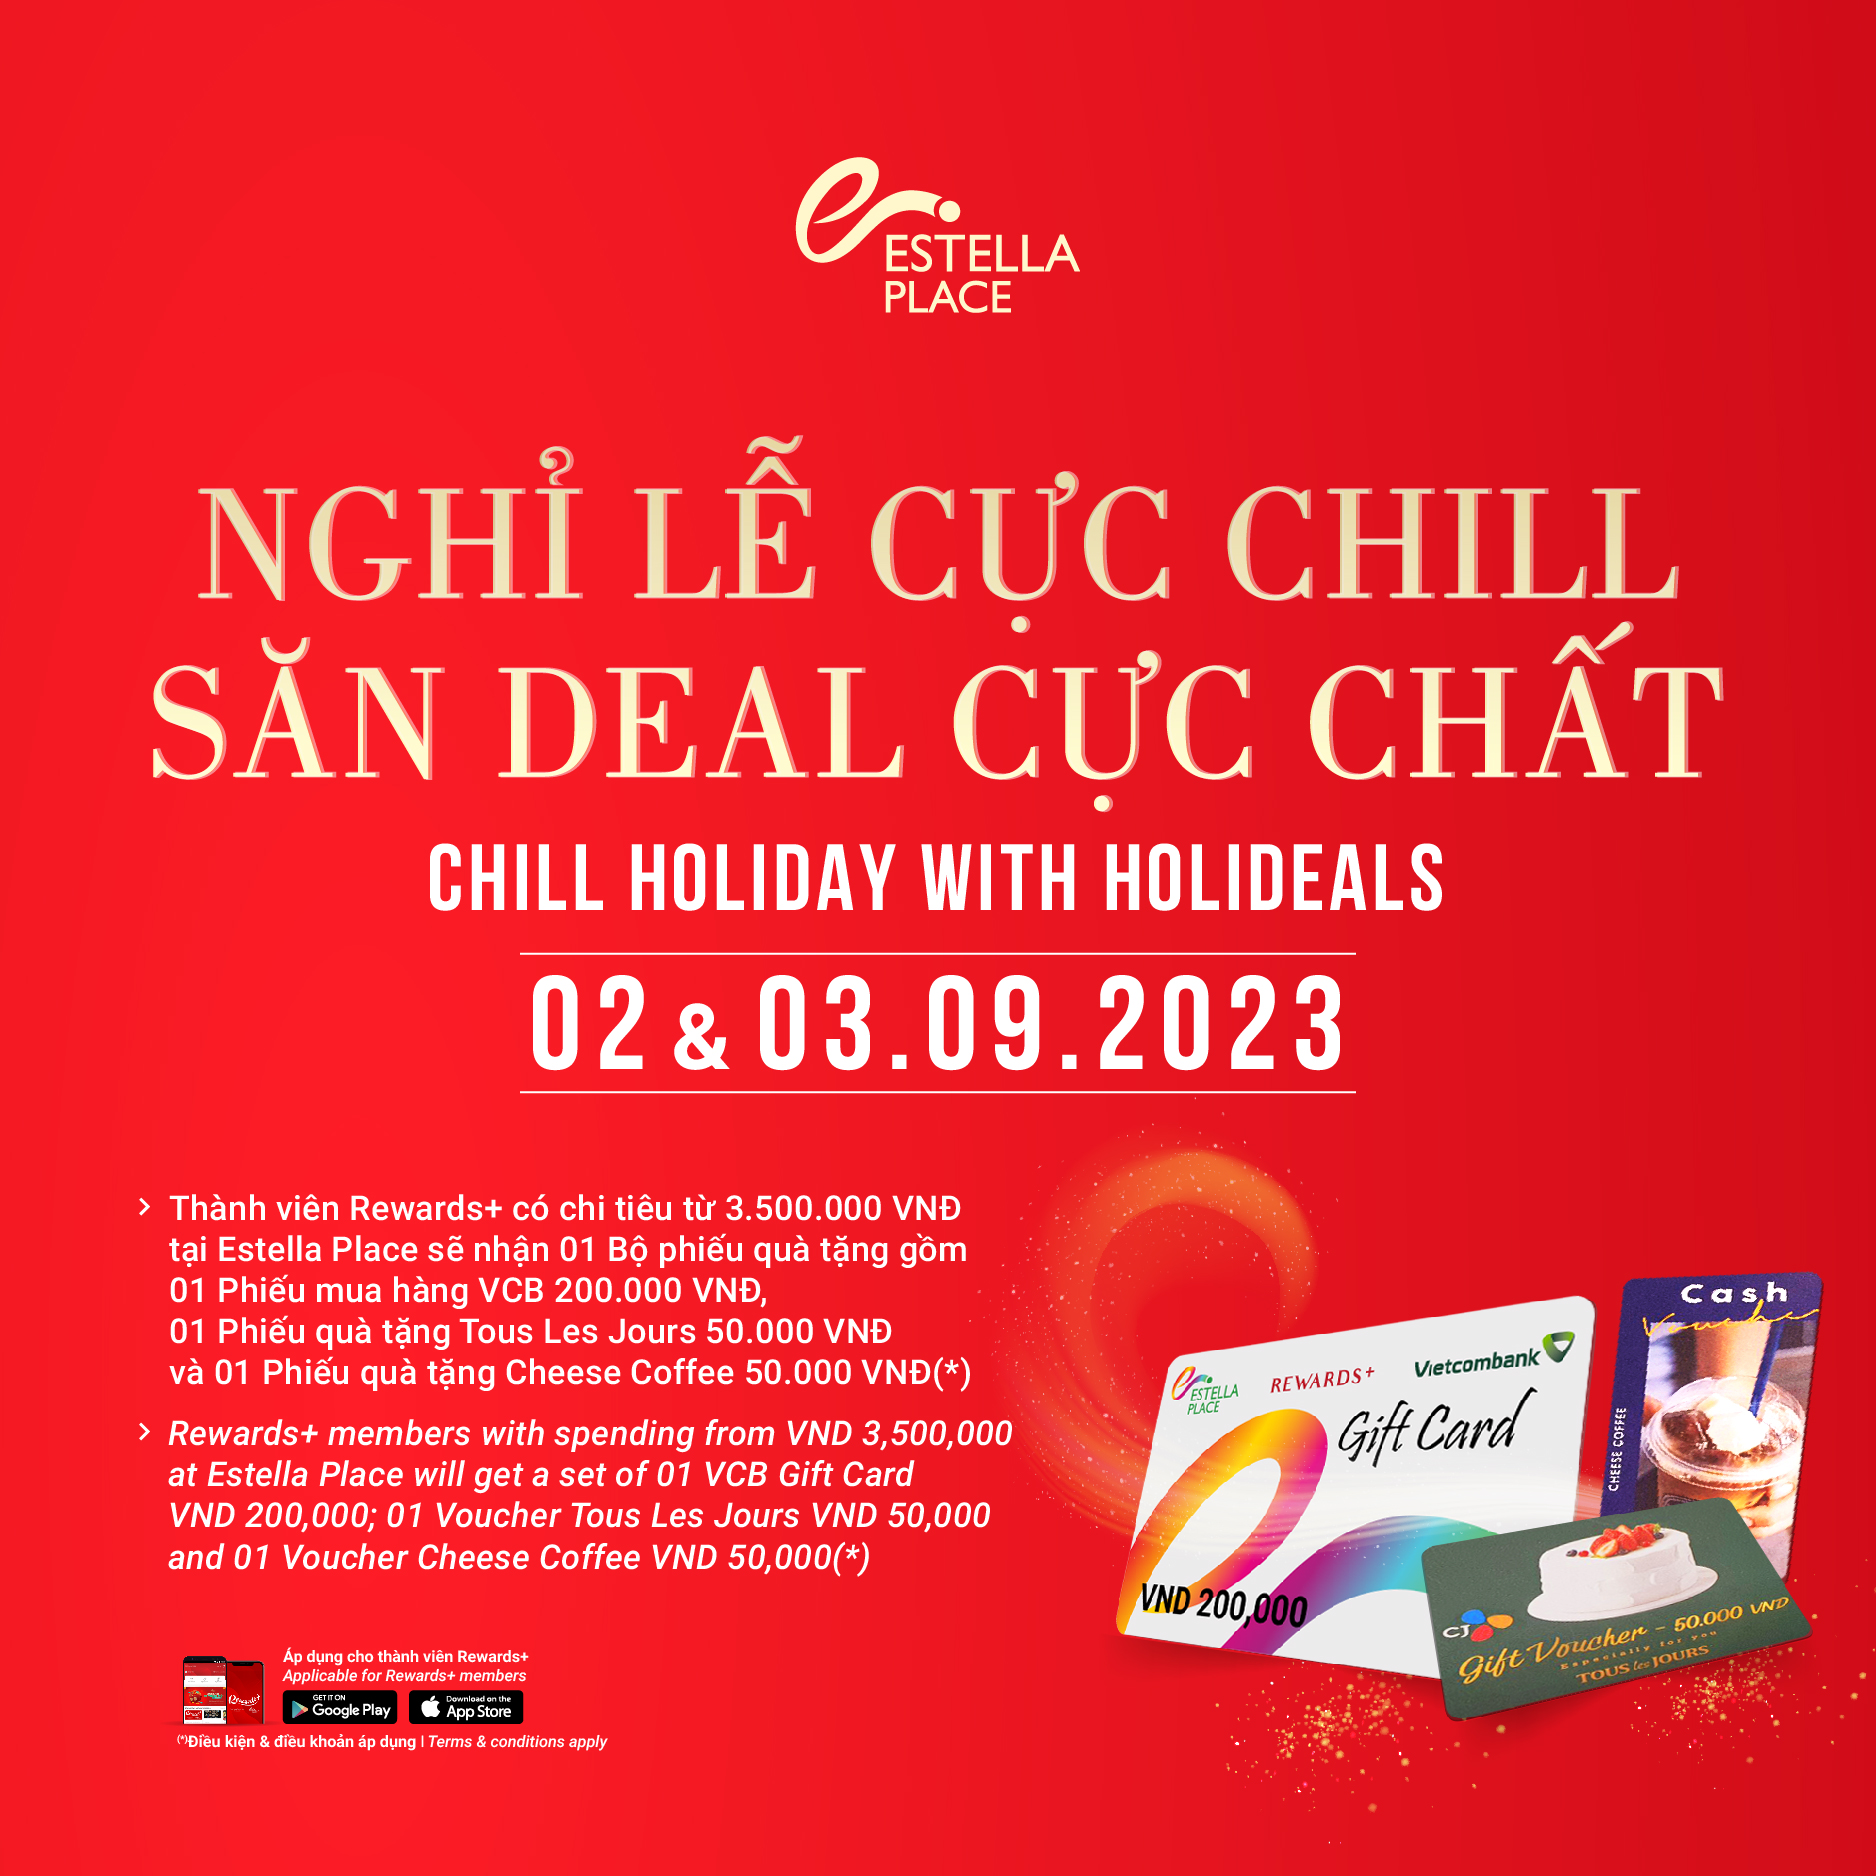 🎉CHILL HOLIDAY WITH HOLIDEALS🎉